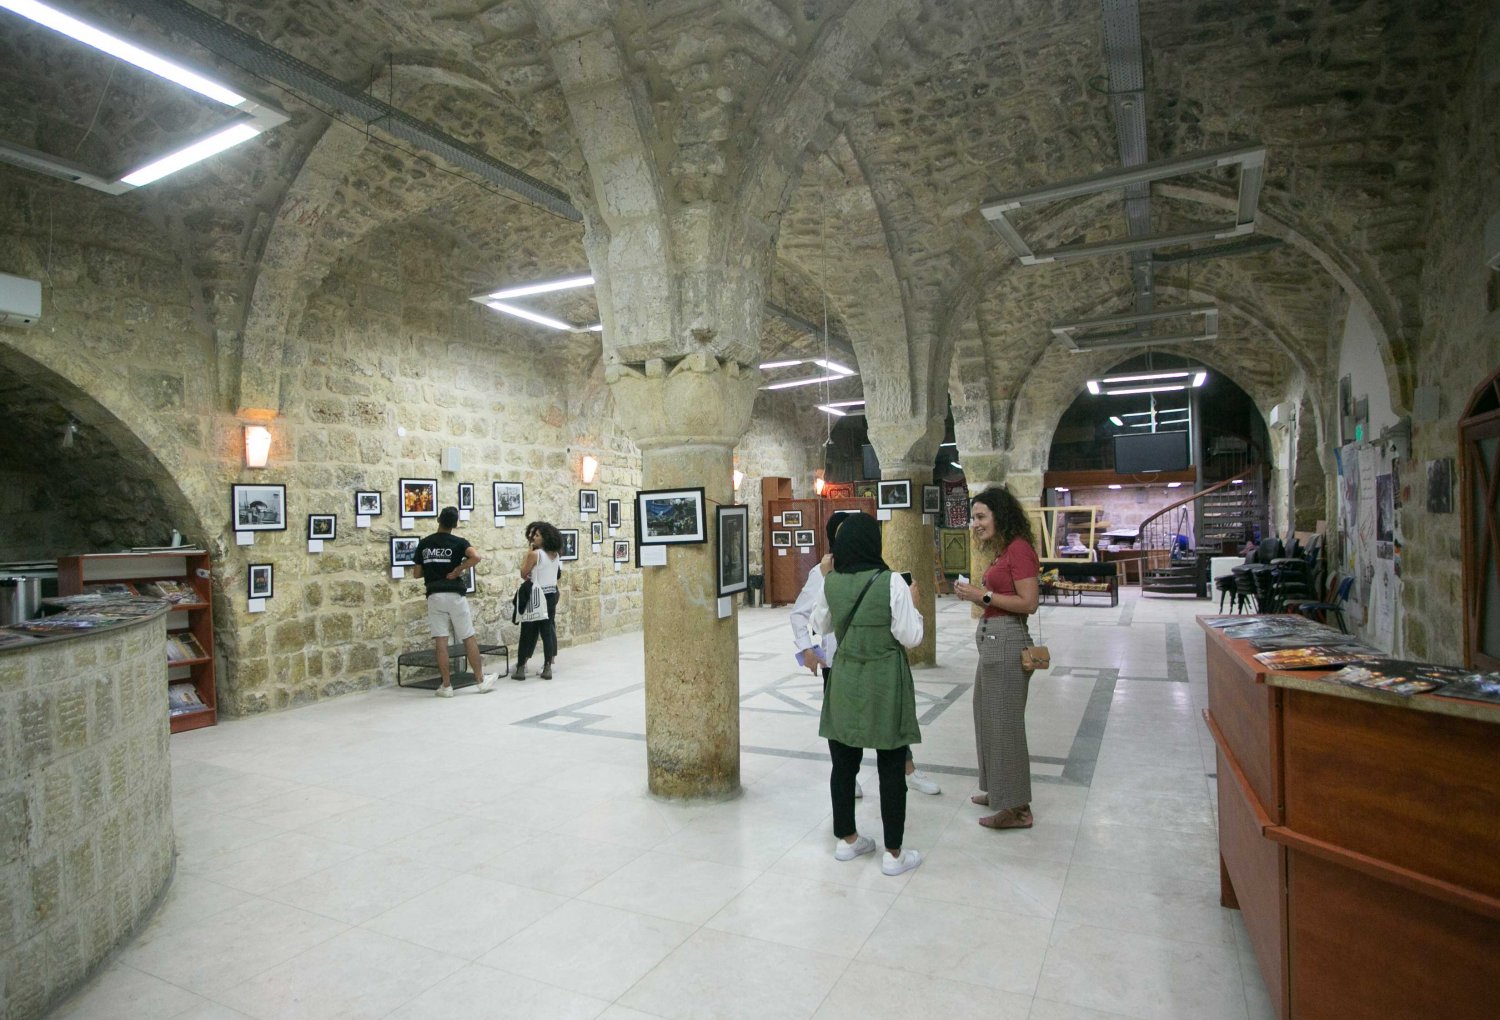 Opening the Souq Stories Exhibit at the African Community Society in the Old City of Jerusalem